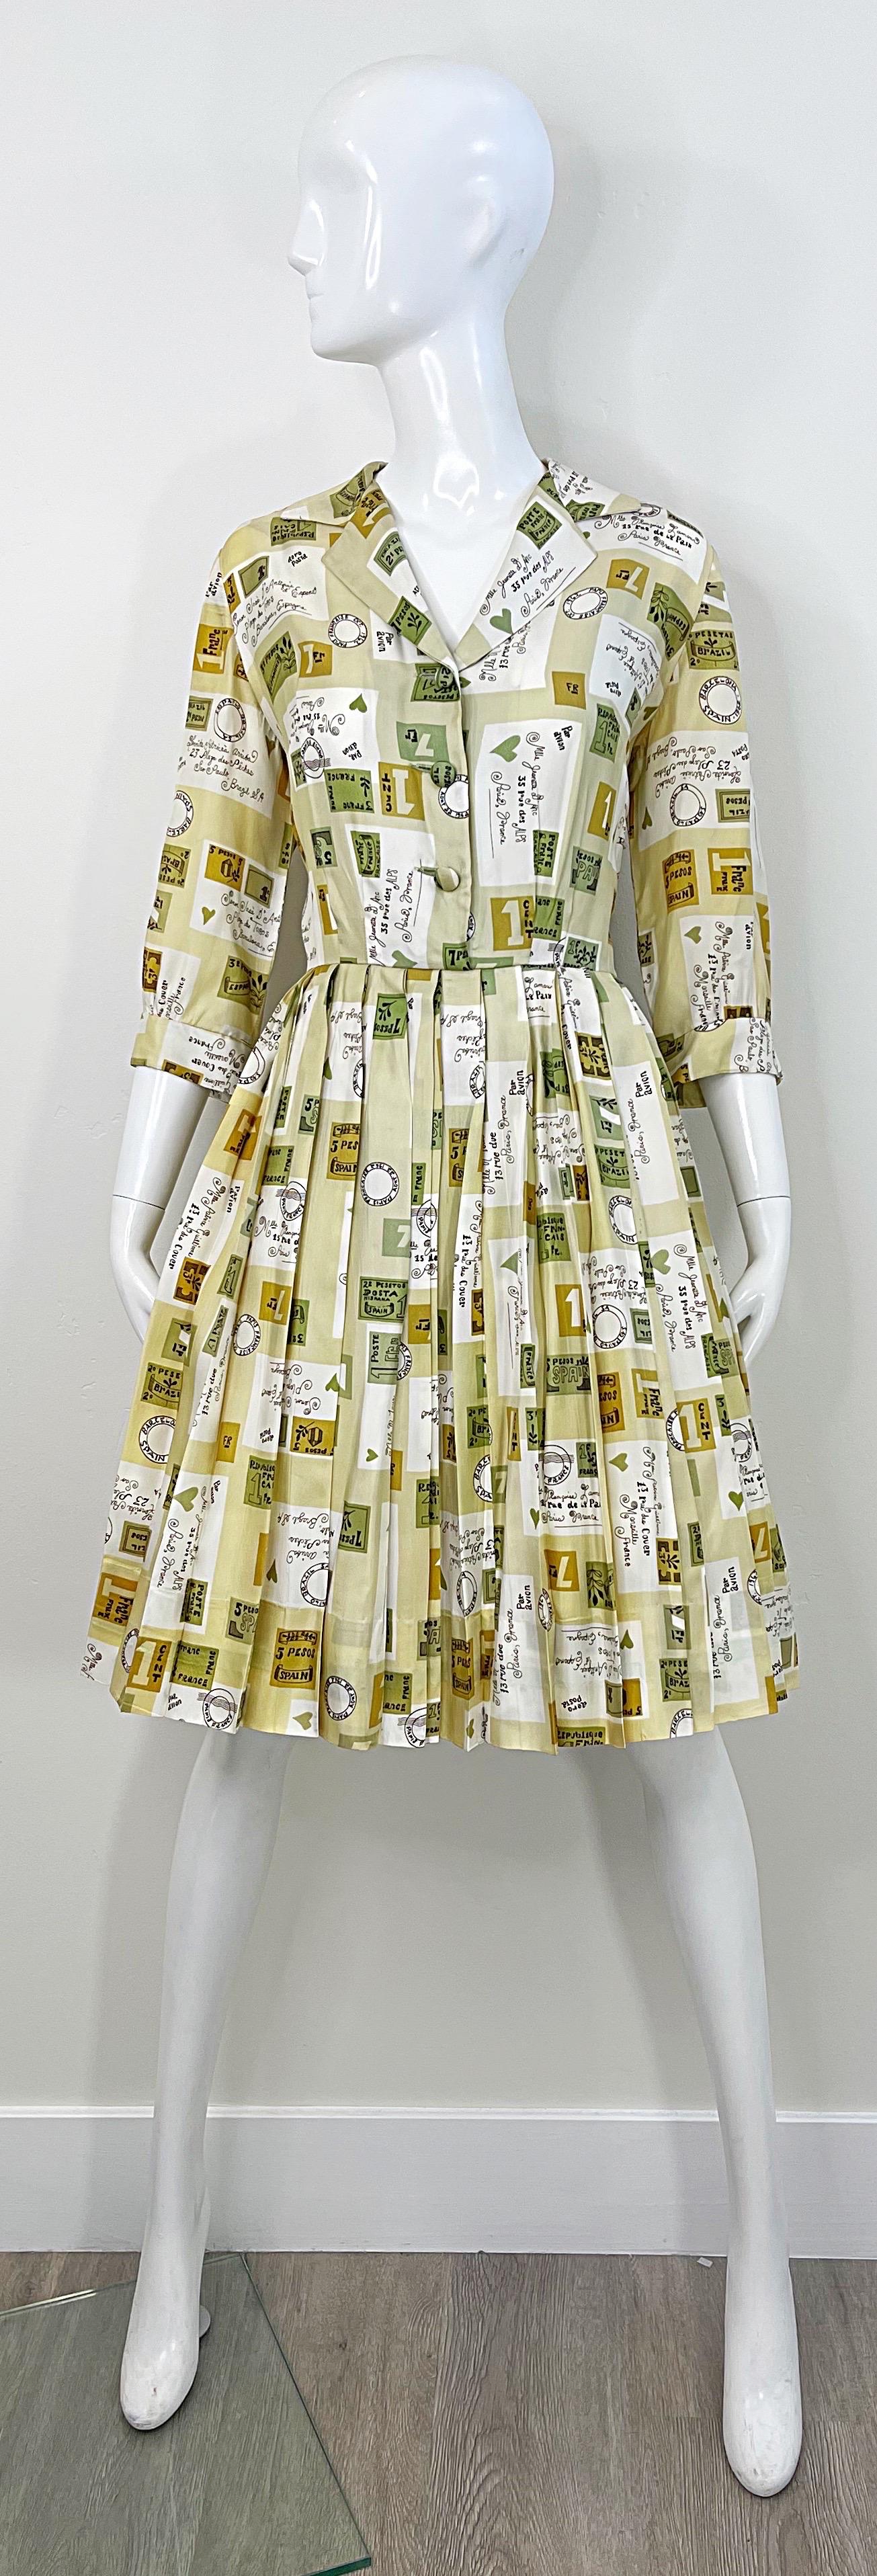 Chic and rare CHARLES HYMEN novelty postcard print fit n’ flare silk dress ! Features prints of different postcards and letters throughout. Buttons up the front center bodice. Hidden metal zipper up the side. Extremely well constructed with heavy